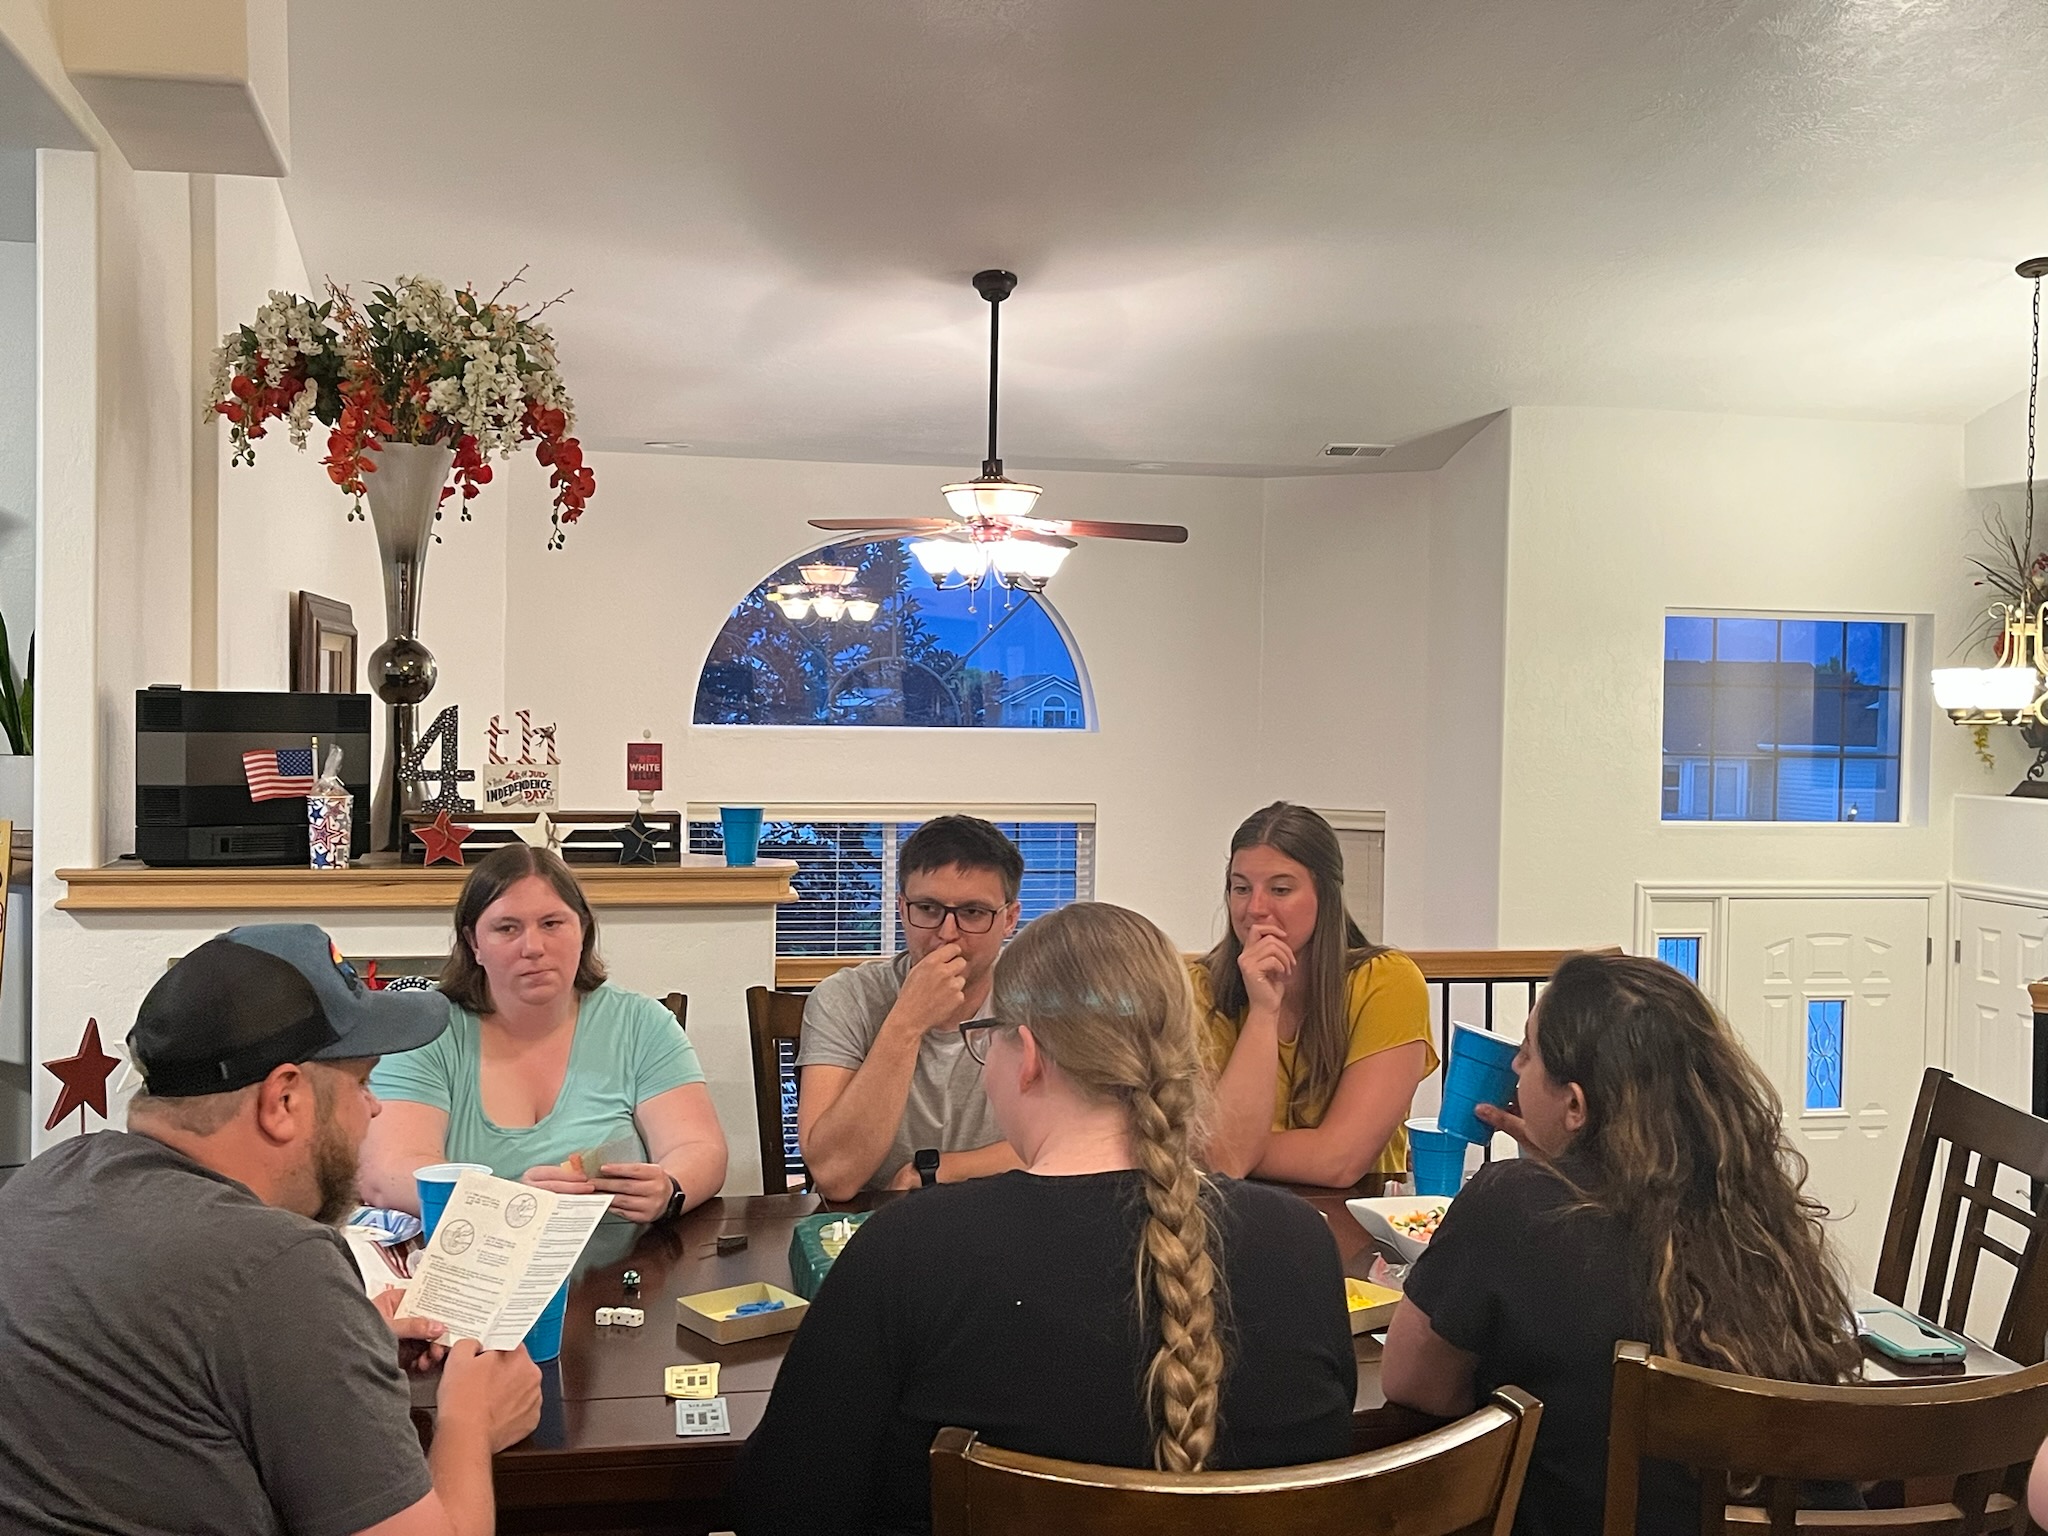 Group gathered at a dinner table for board games